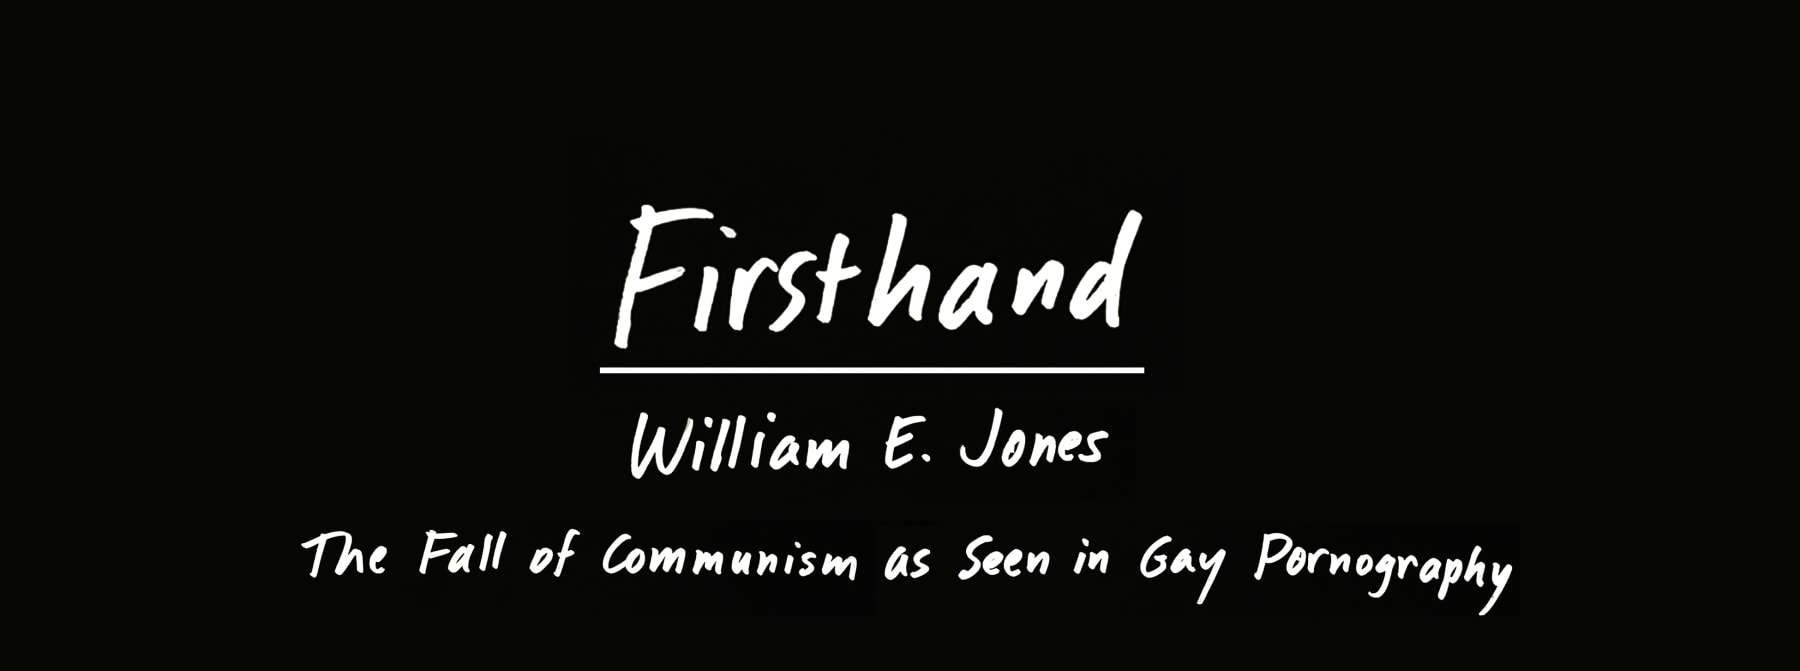 Firsthand: William E. Jones - The Fall of Communism as Seen in Gay Pornography - Viewing Room - David Kordansky Gallery